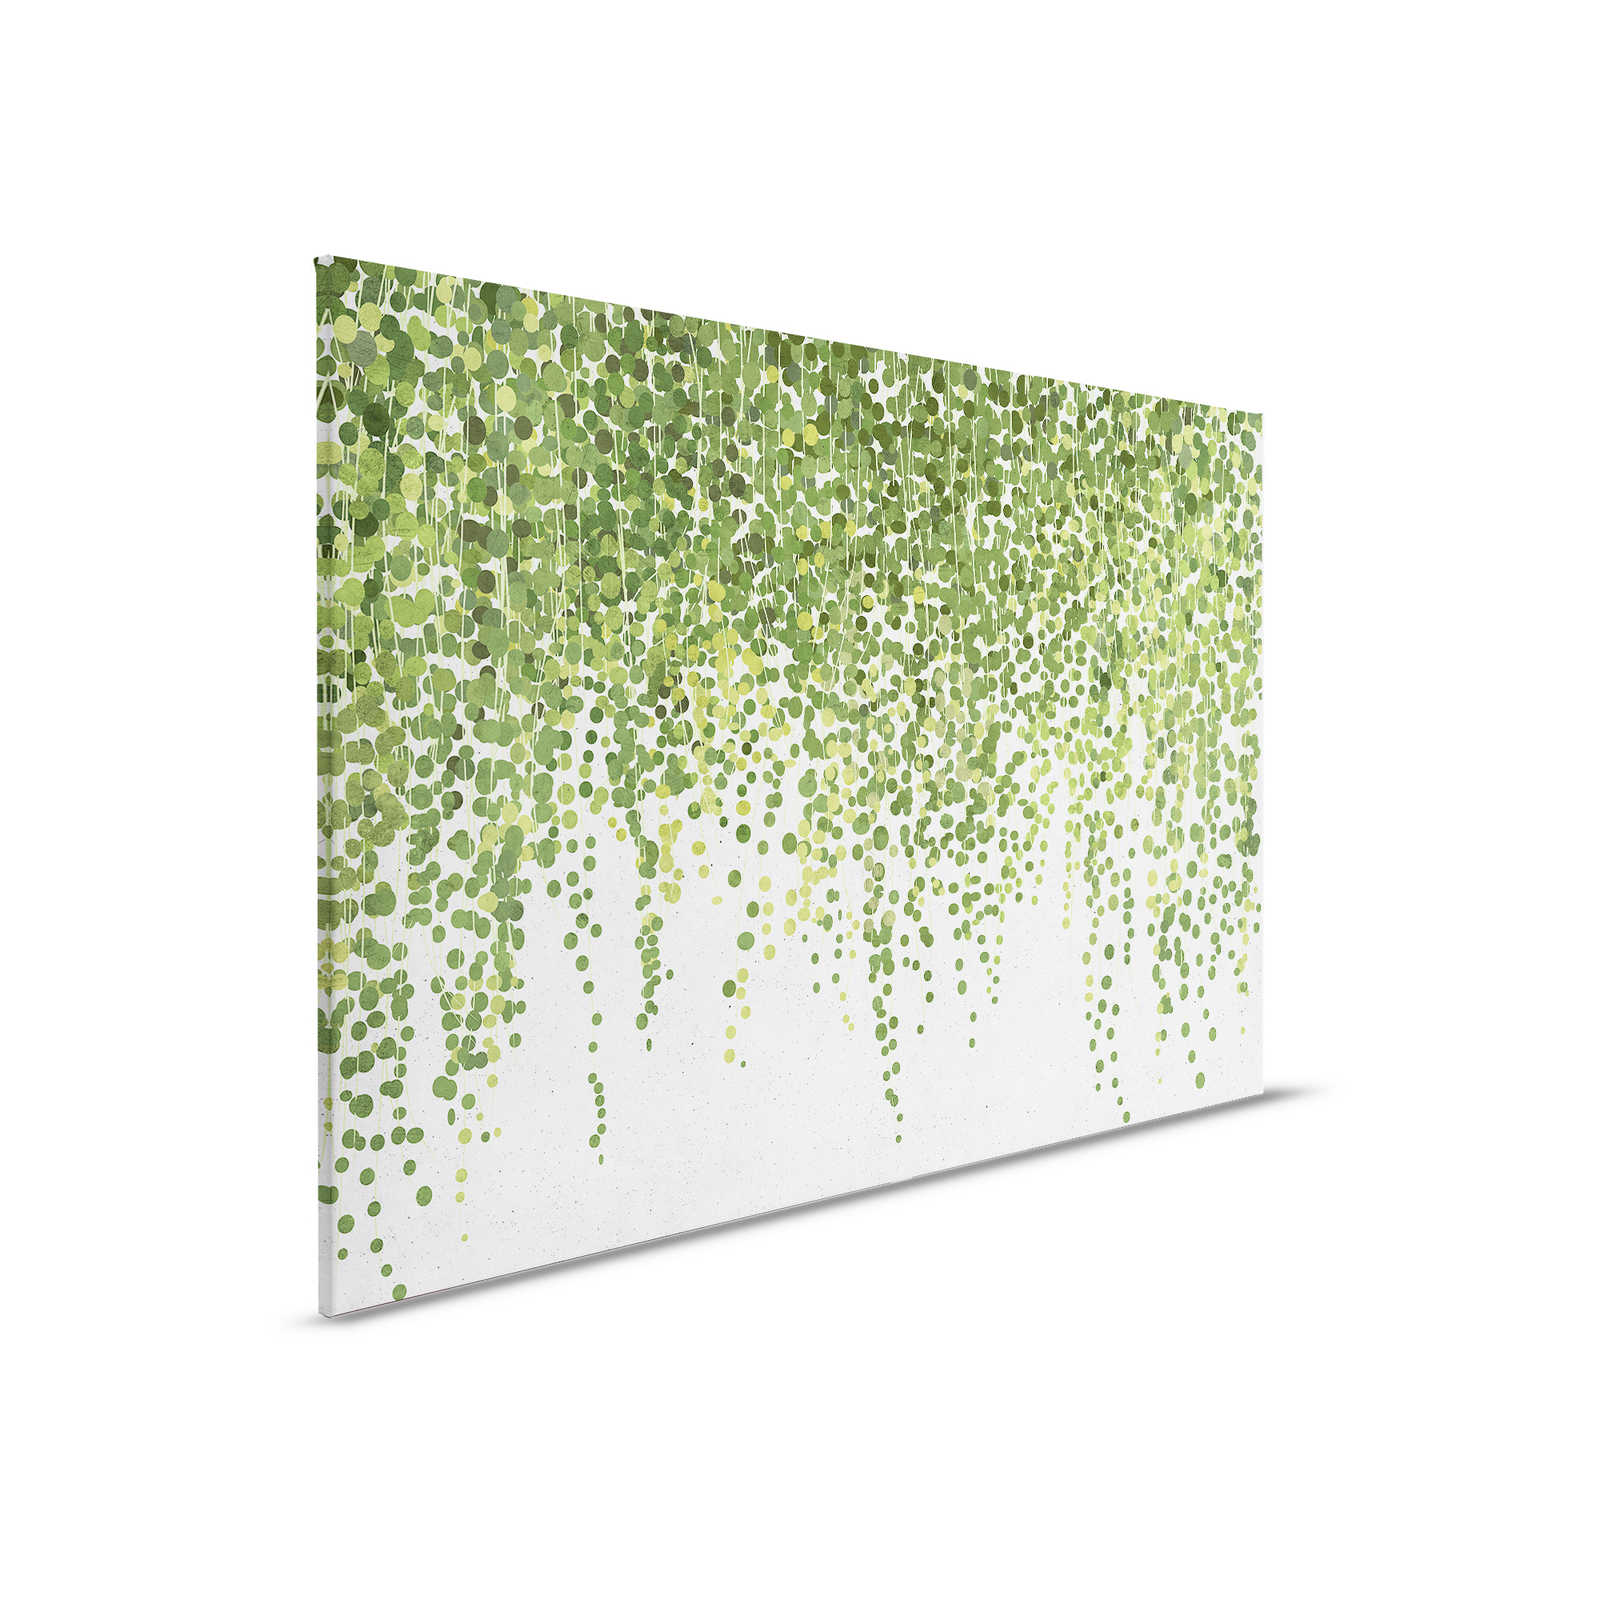 Hanging Garden 1 - Canvas painting Leaves vines, hanging garden - 0,90 m x 0,60 m
